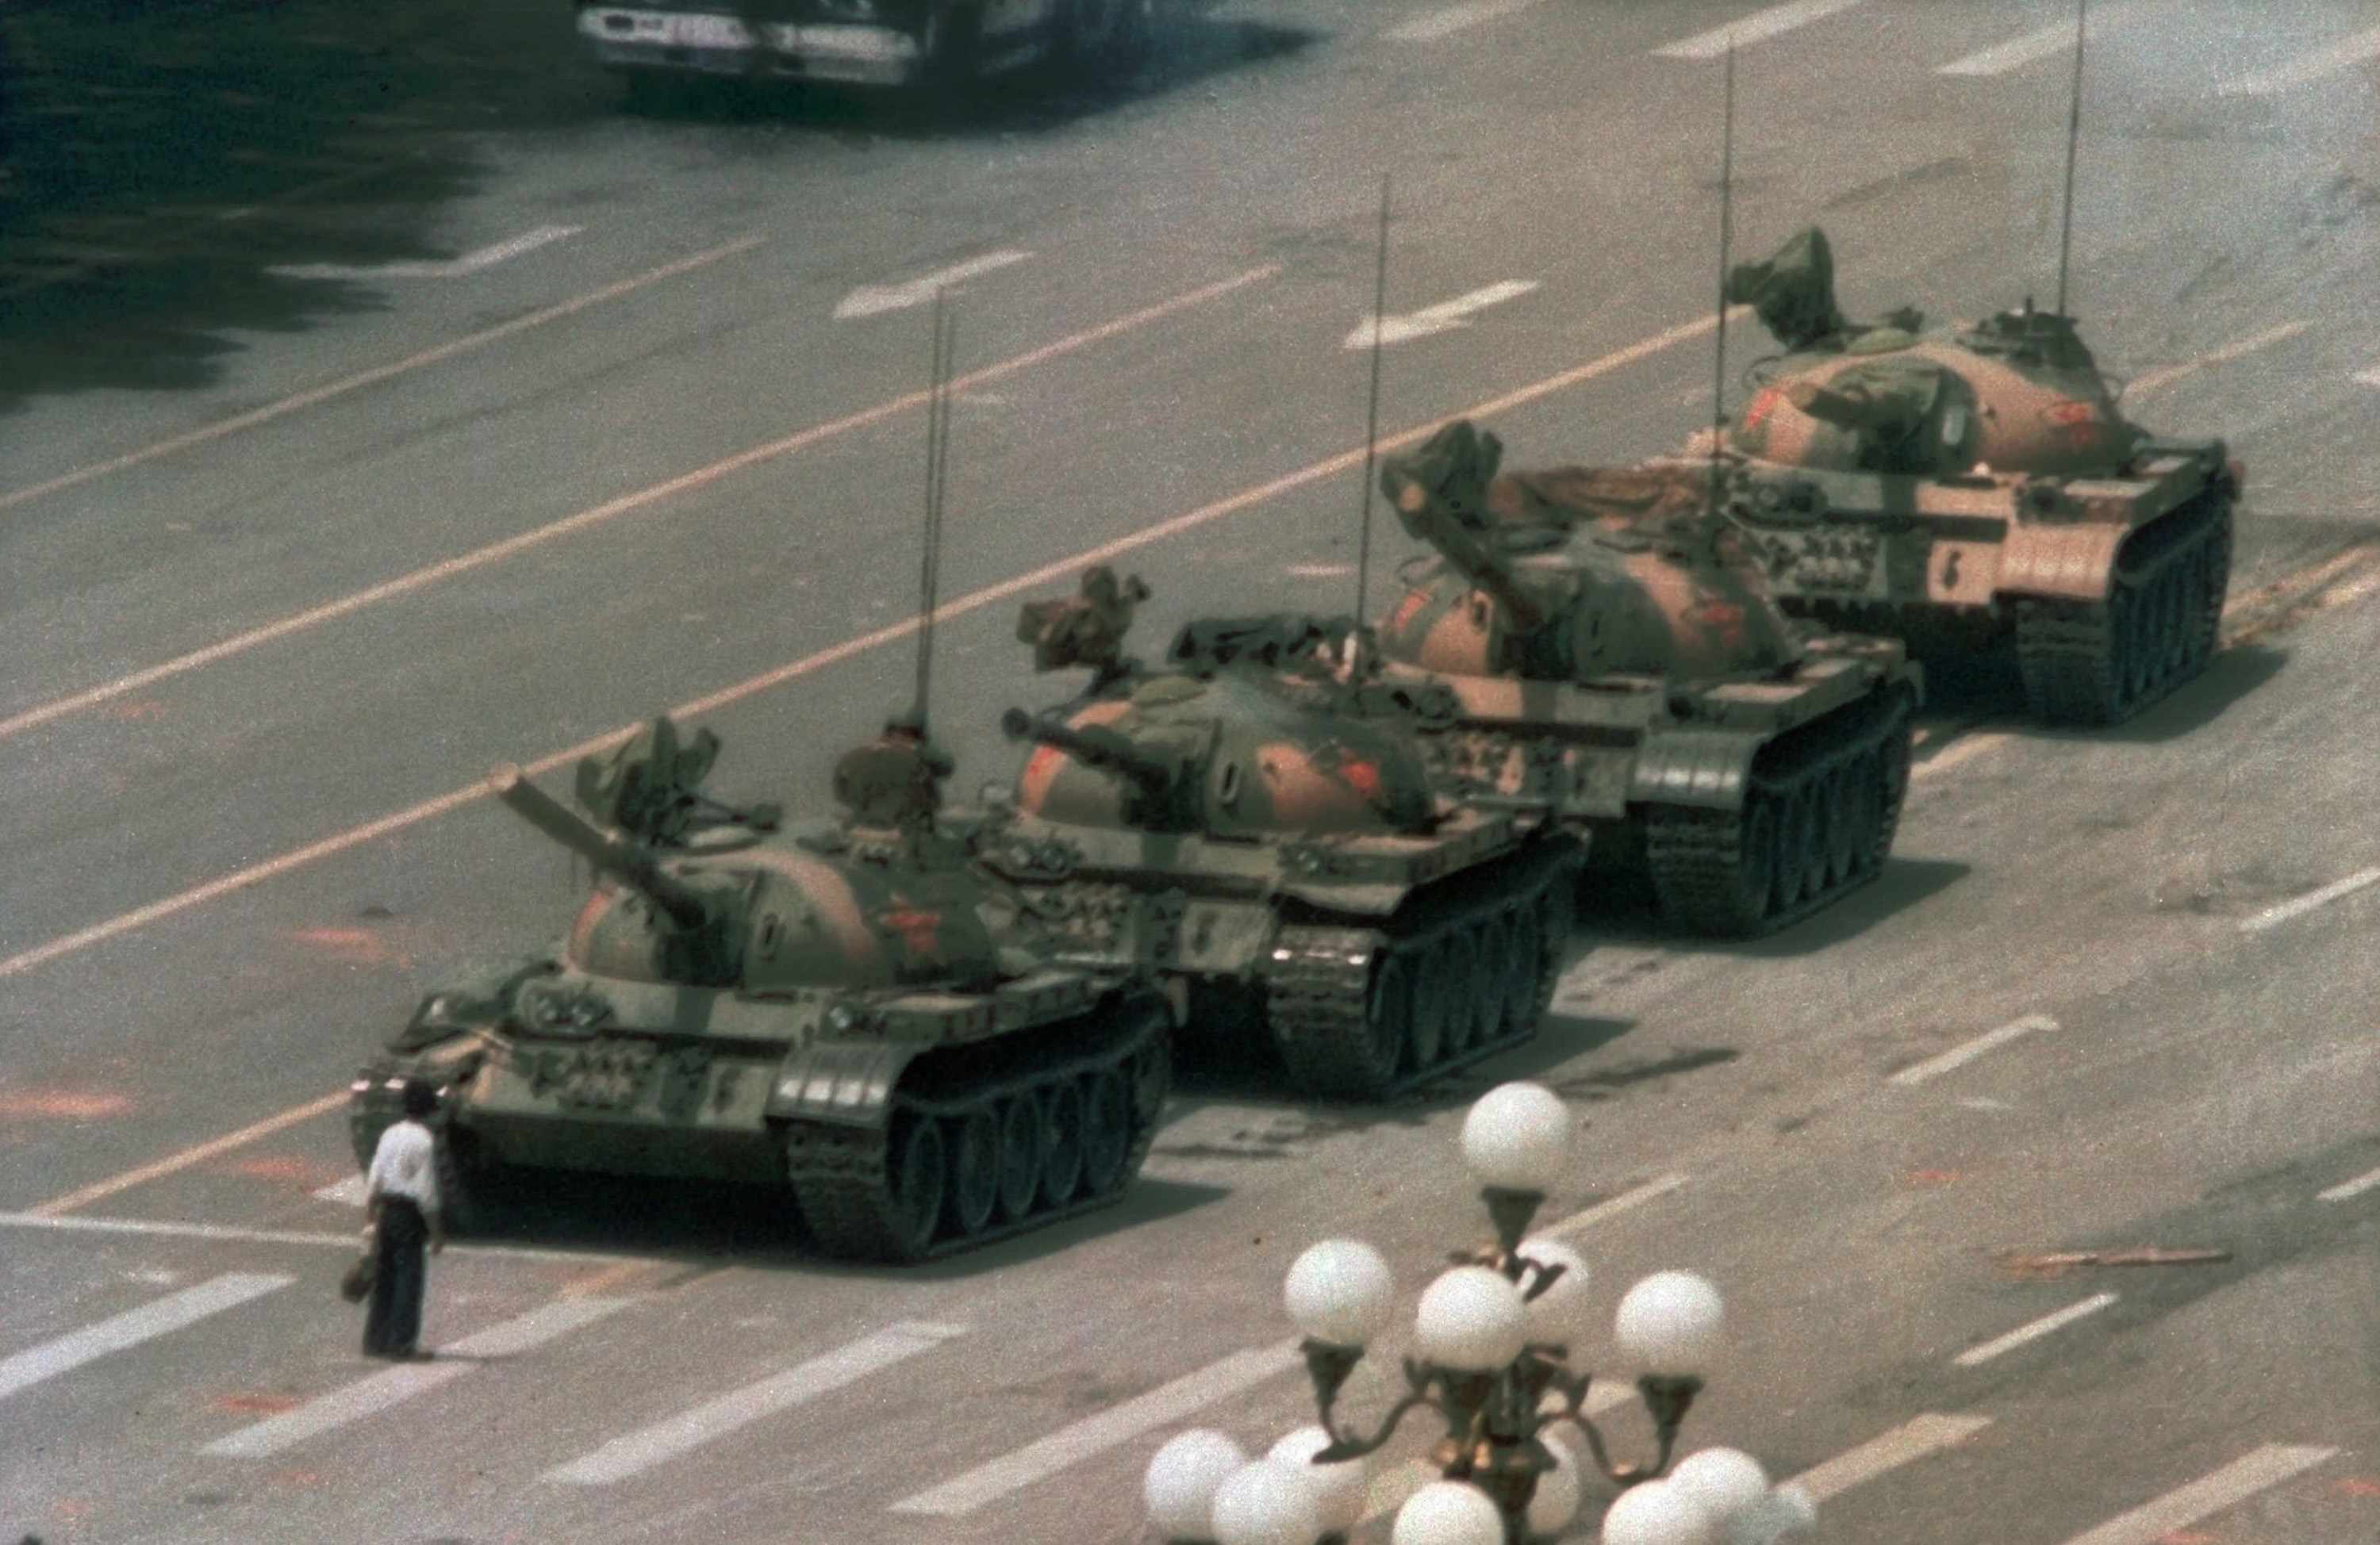 A Chinese man stands alone to block a line of tanks heading east on Beijing's Cangan Blvd. in Tiananmen Square on June 5, 1989. The man, calling for an end to the recent violence and bloodshed against pro-democracy demonstrators, was pulled away by bystanders, and the tanks continued on their way. (Jeff Widener—AP)